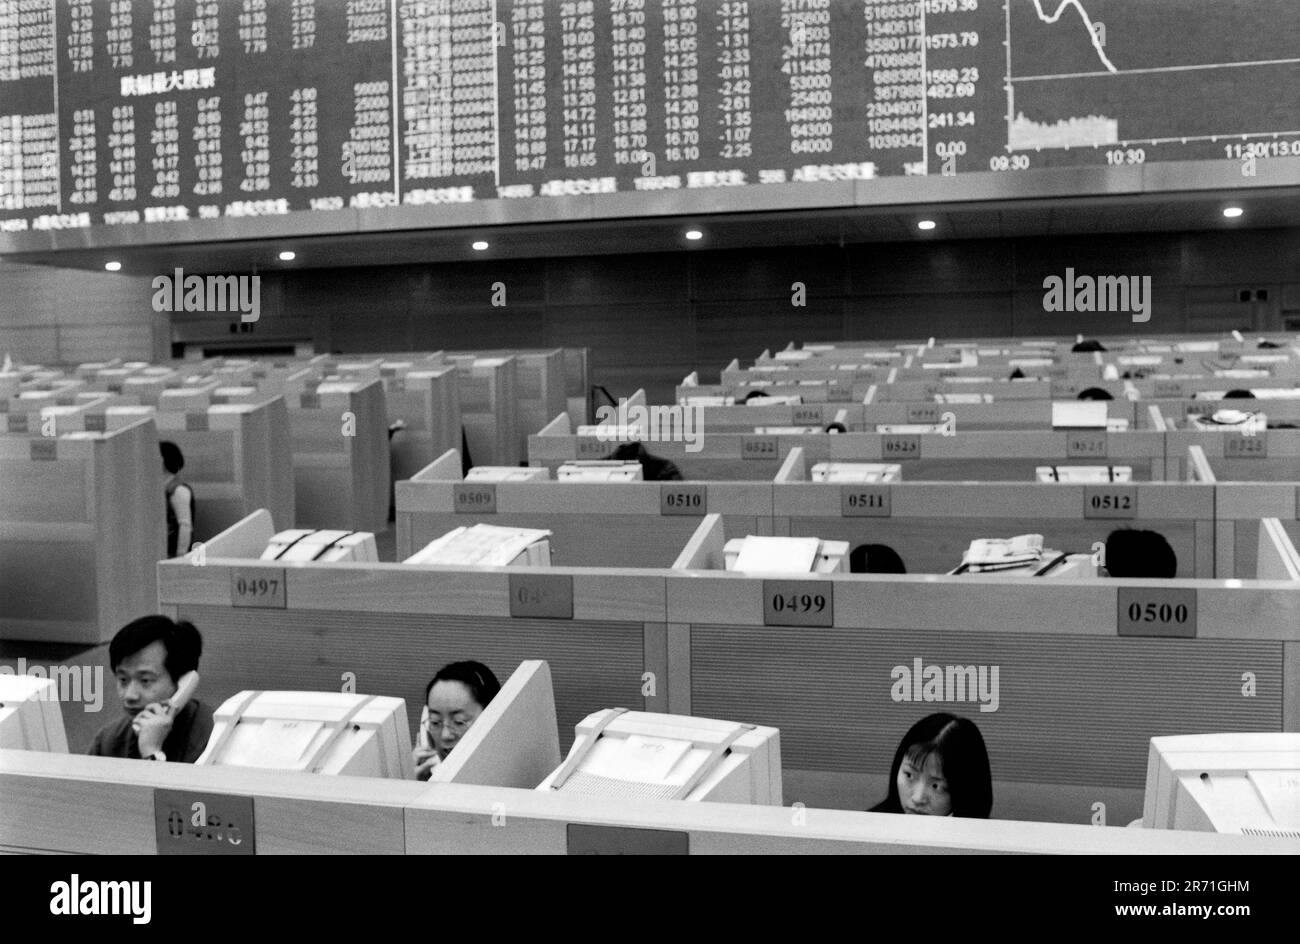 Shanghai China 2000.  'Red vests' on the trading floor of the Shanghai Stock Exchange building in Pudong, which opened late 1997.  The biggest in mainland China, the stock exchange was only established in Shanghai in 1990 but now has over 600 listed companies and the market is value number two in the Asia Pacific region.  It is government policy to encourage people to be involved in stock market as many quoted companies are state-owned, or former state-owned, and badly in need of capital. 2000s HOMER SYKES Stock Photo